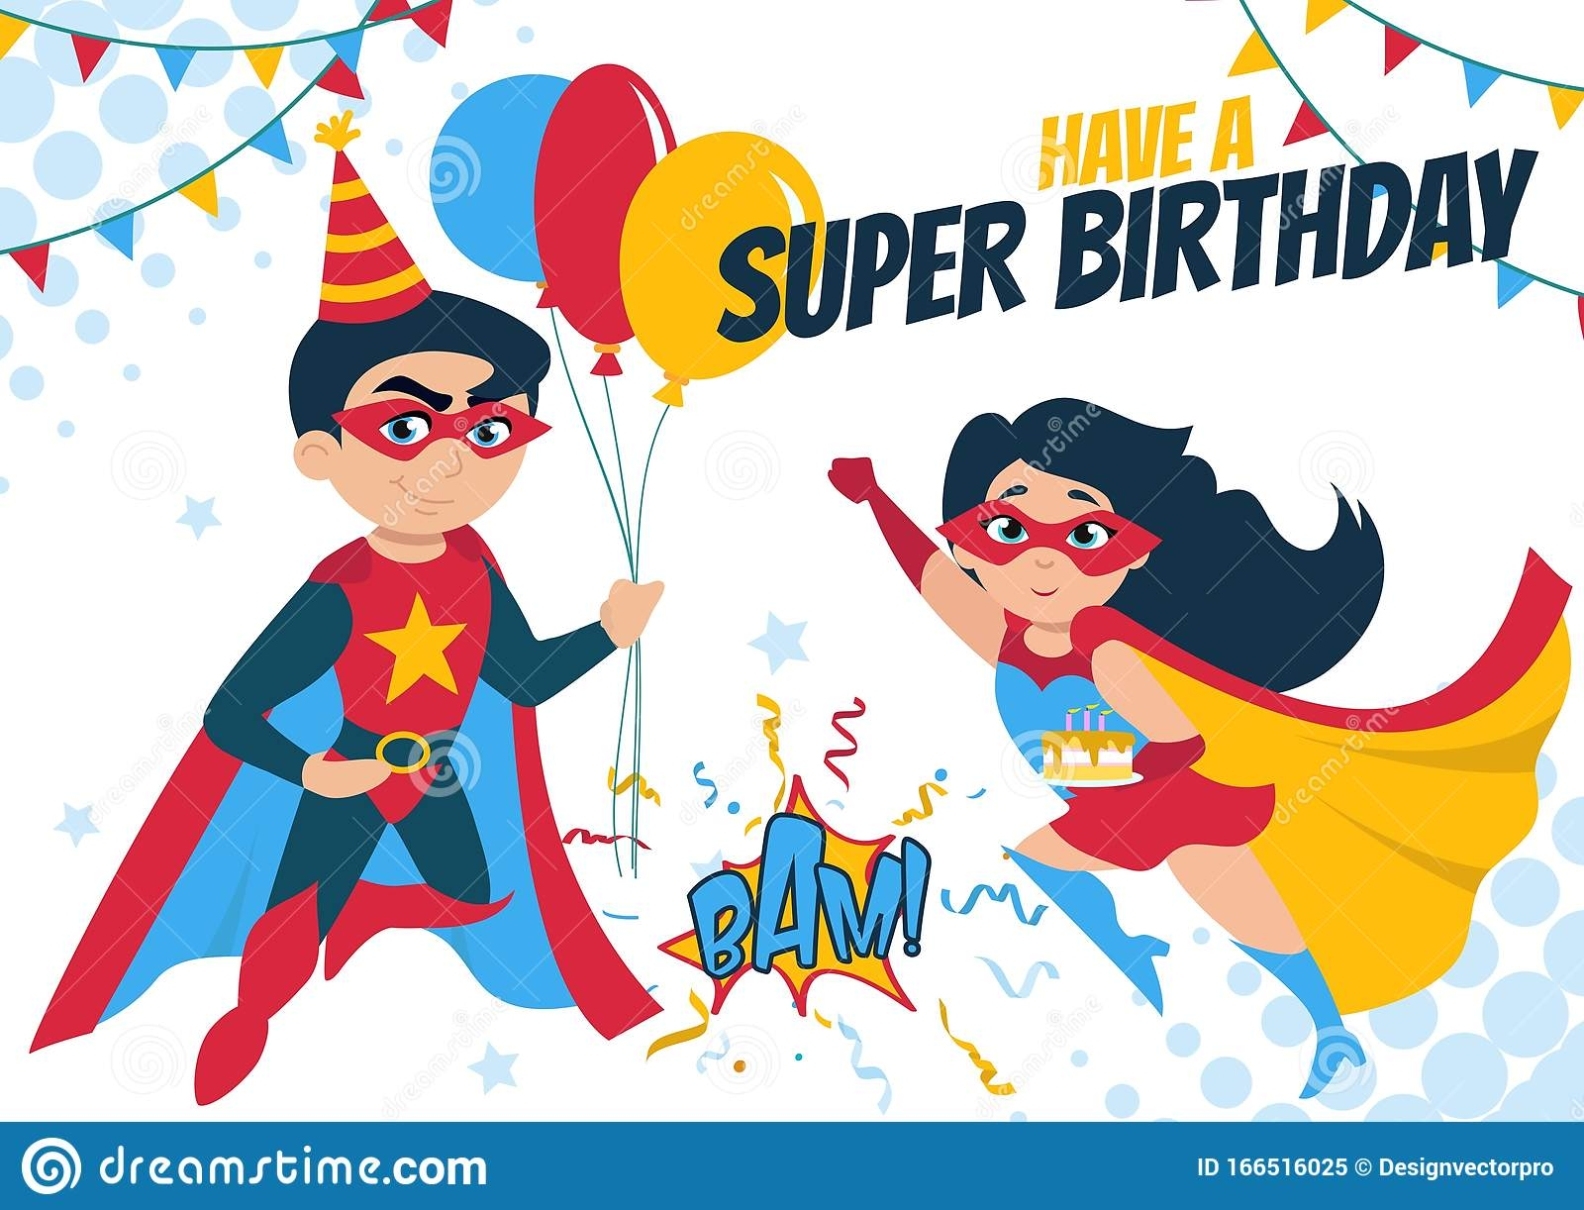 Have A Super Birthday Greeting Card Design Stock Vector – Illustration In Superhero Birthday Card Template